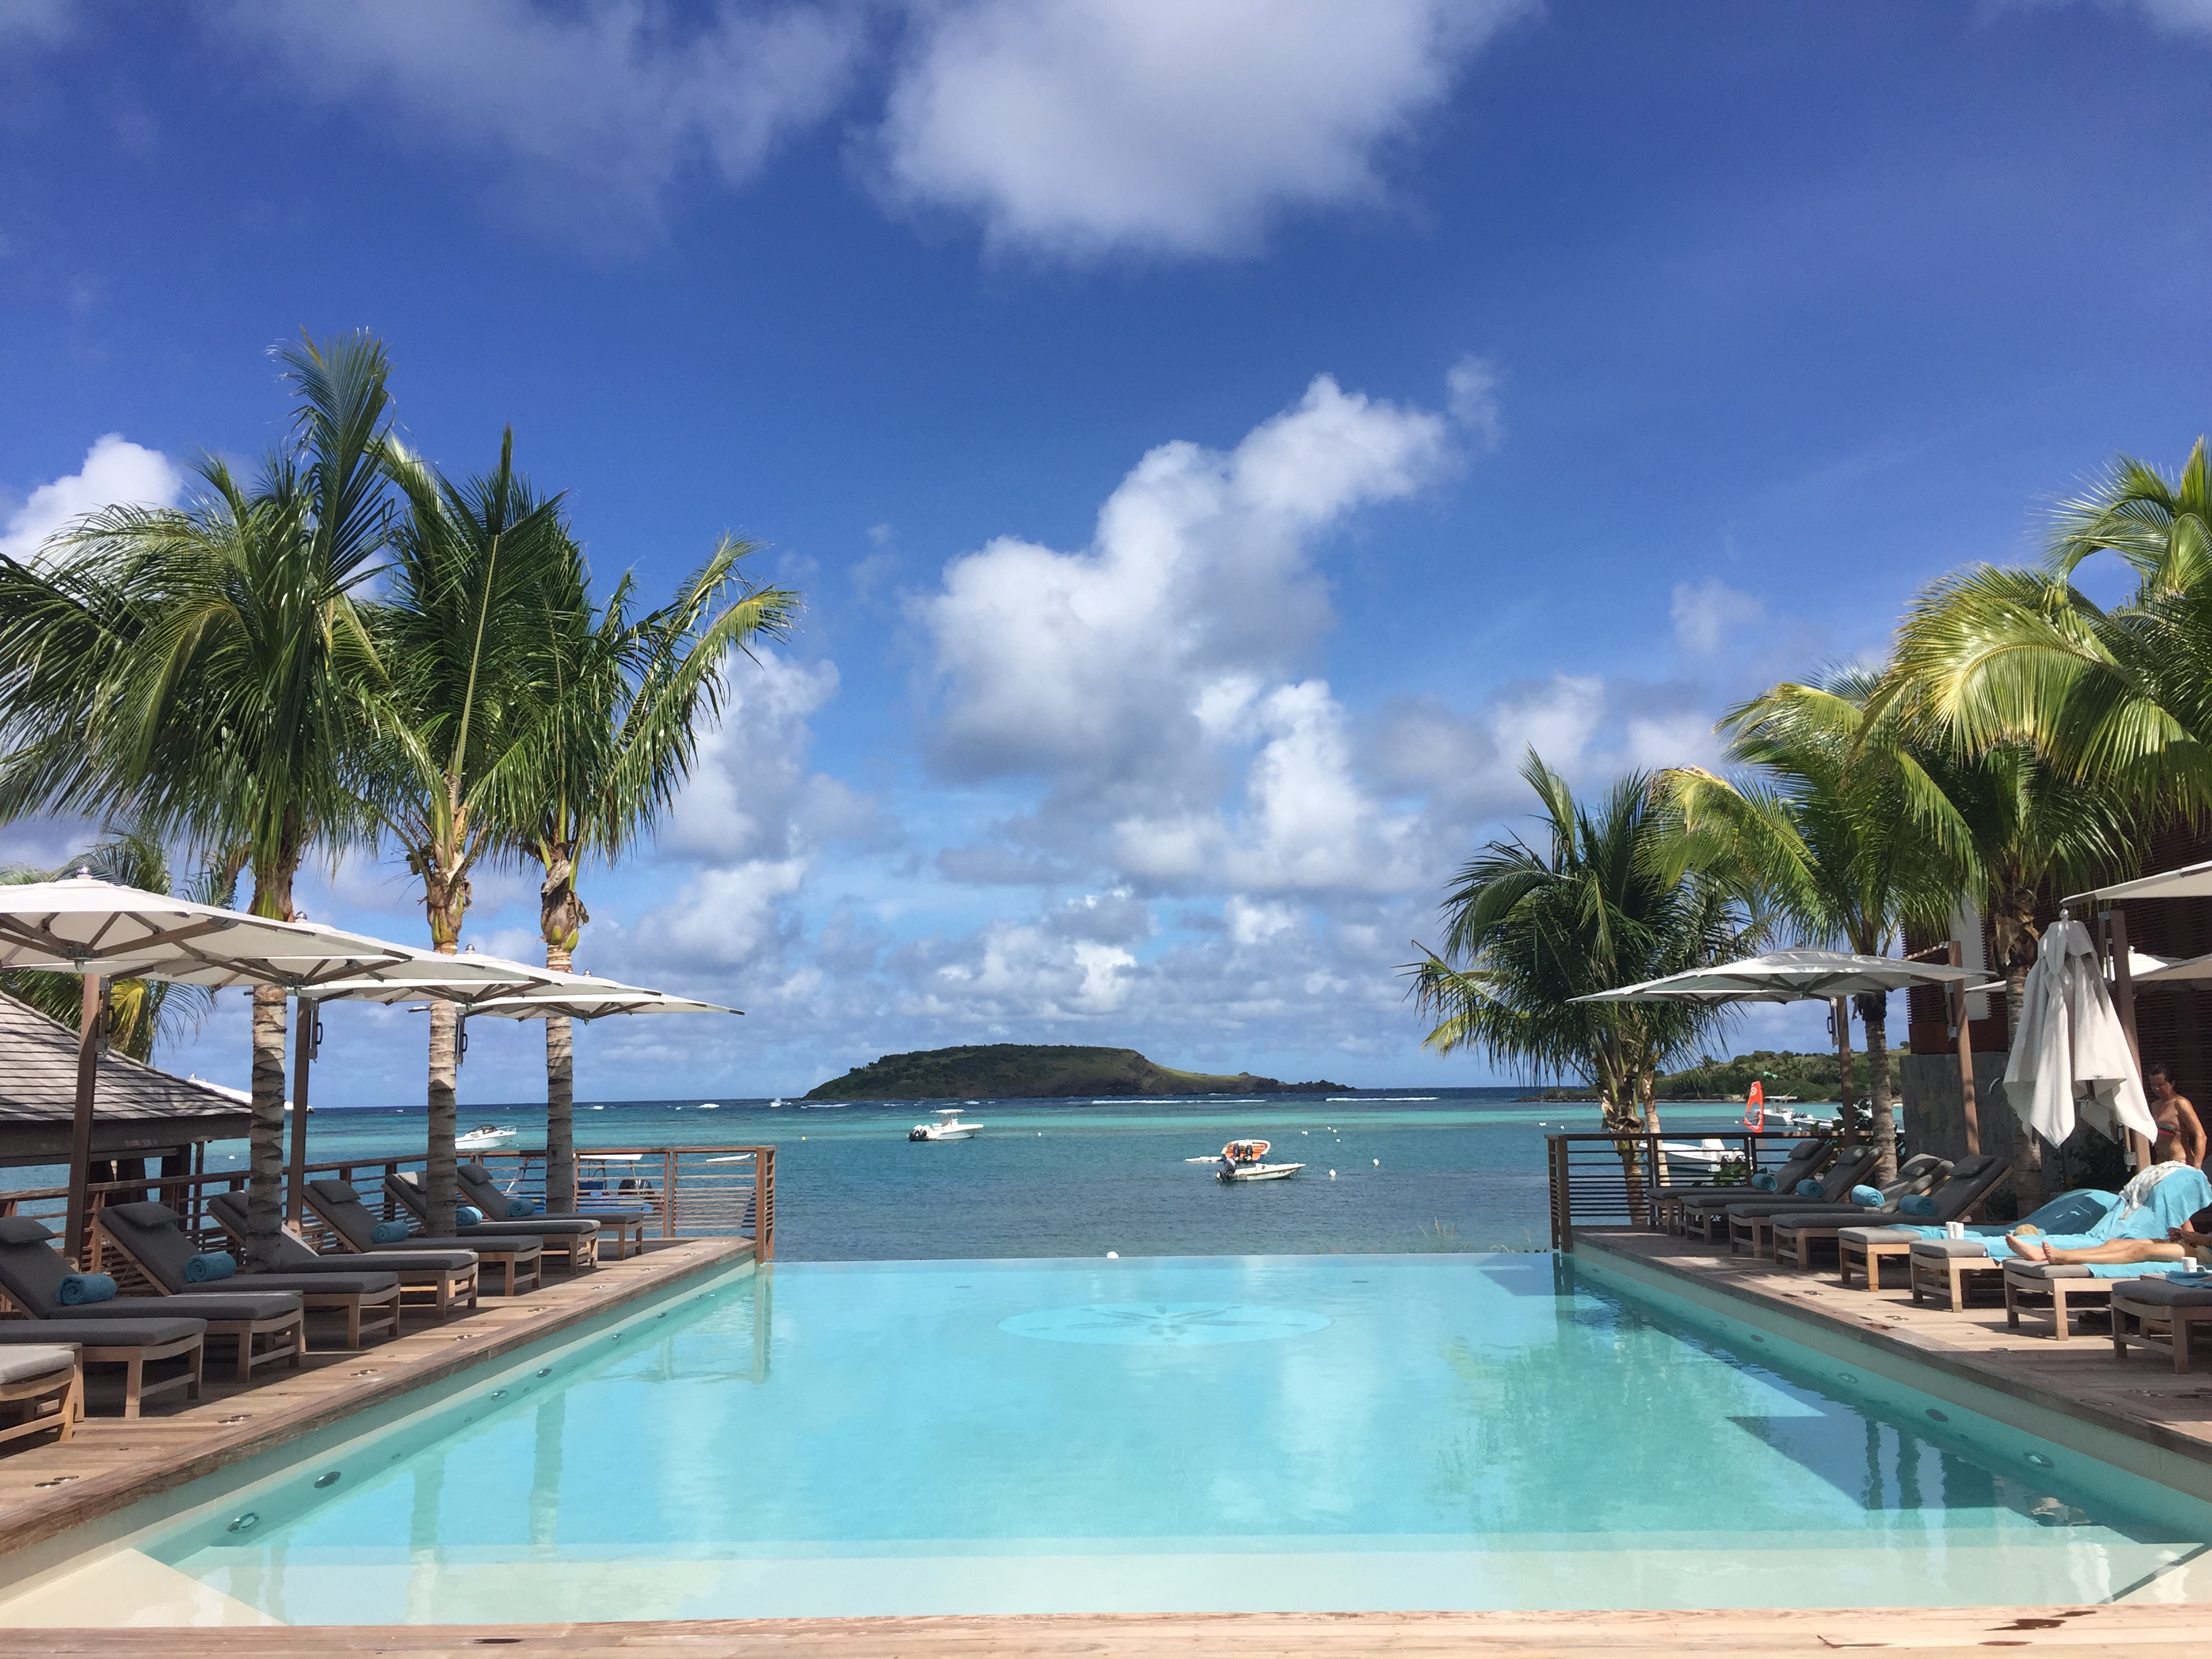 Caribbean Paradise - A week in Anguilla & St. Barths - Part 2 - Lulu and  Lattes